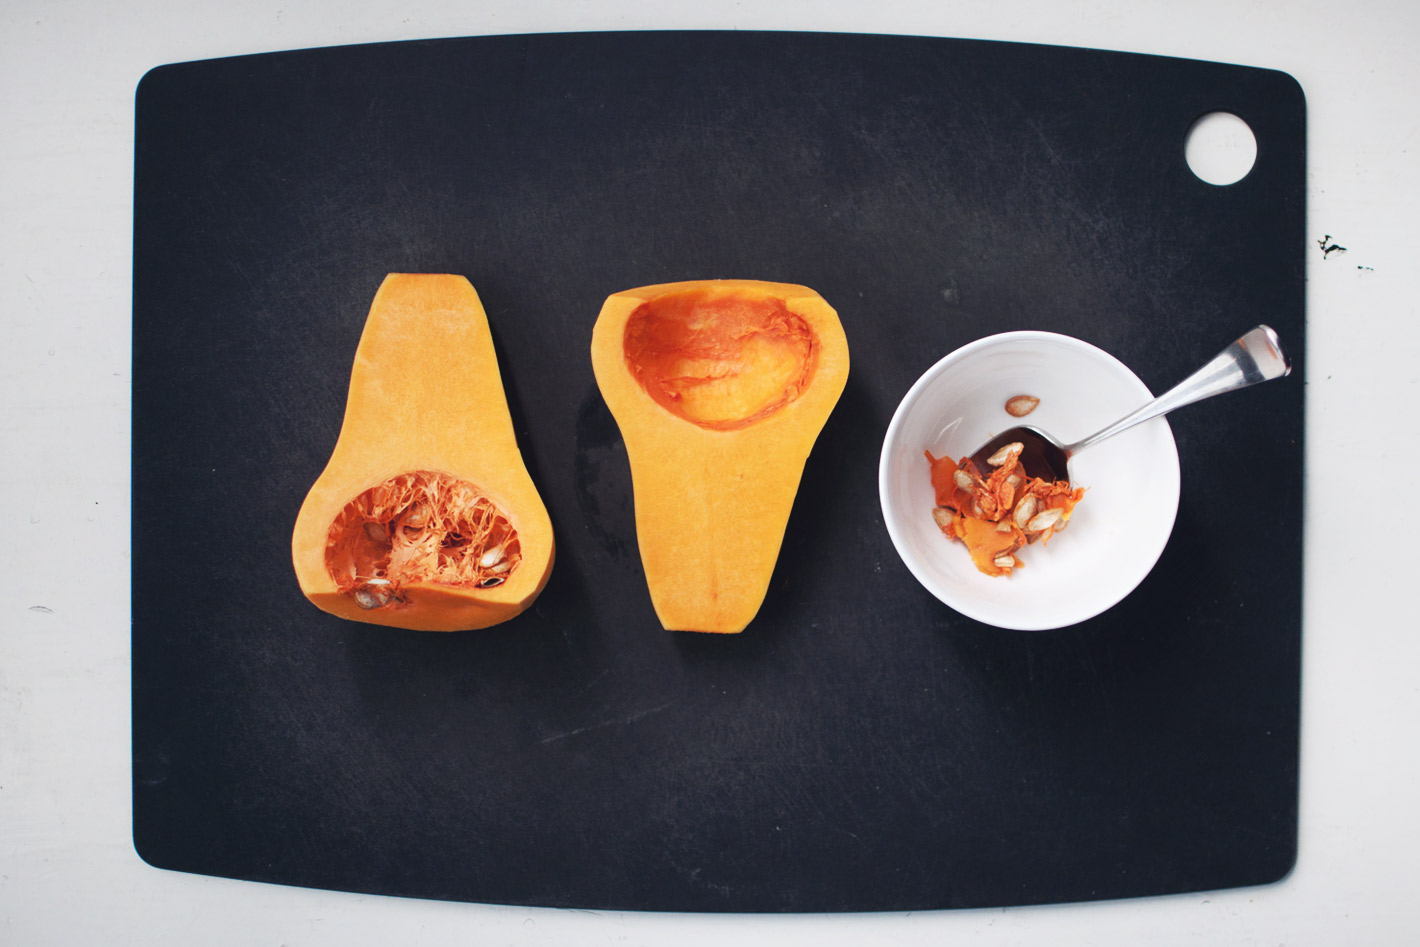 How to Roast Butternut Squash | Wake the Wolves